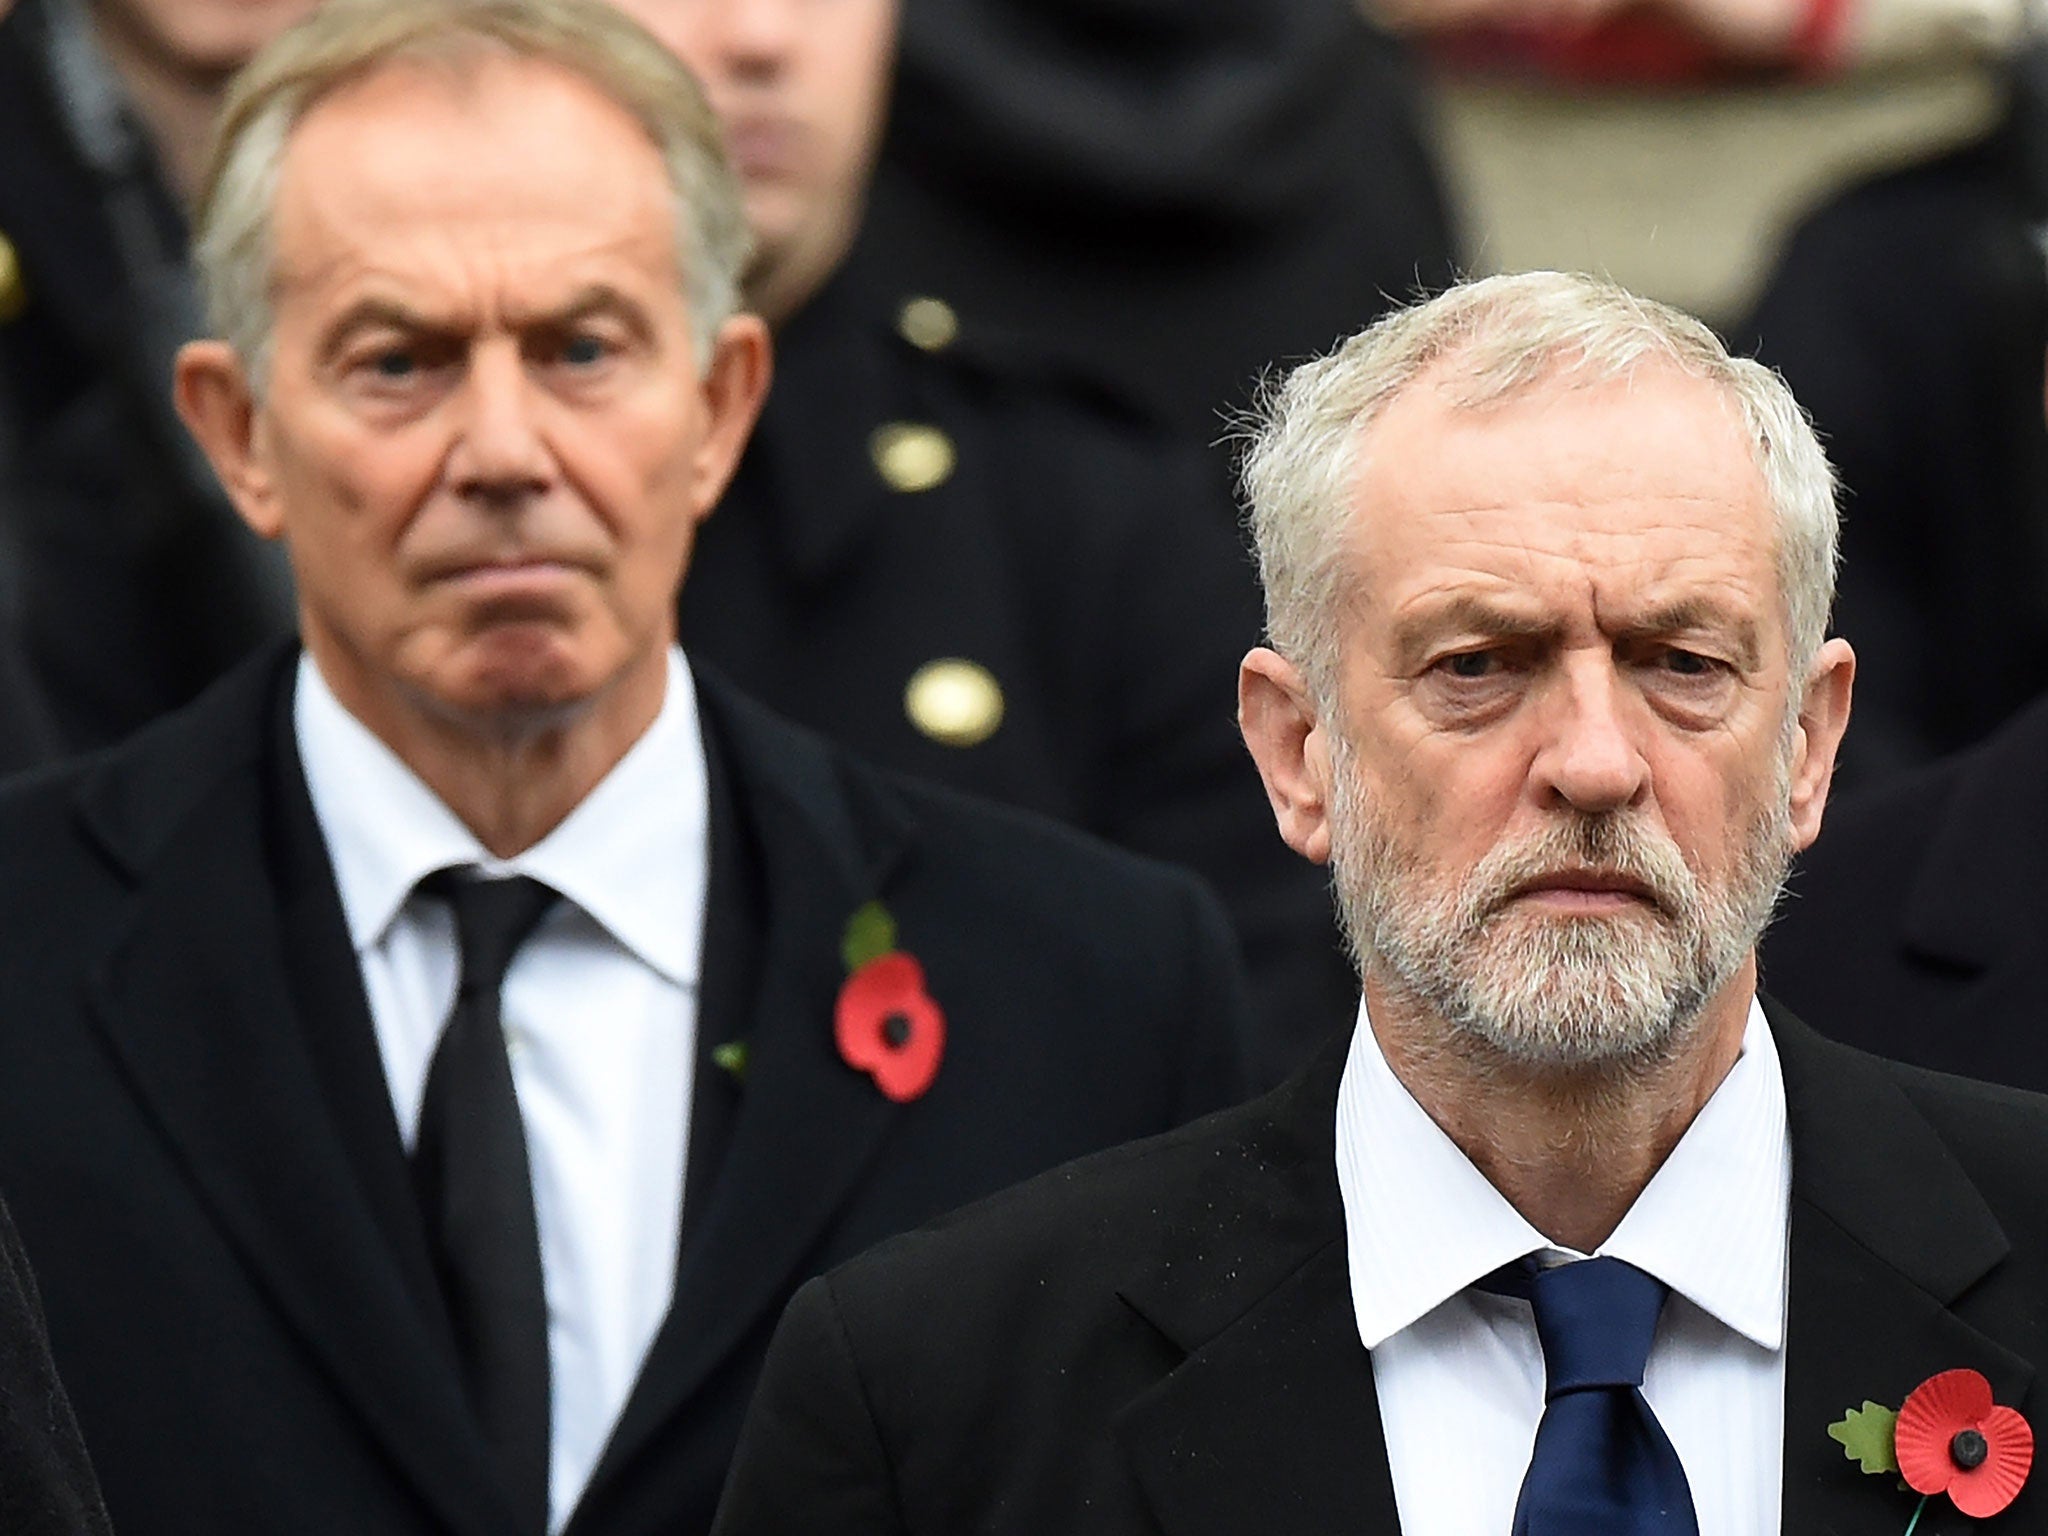 Jeremy Corbyn stands in front of Tony Blair at the Remembrance Sunday service at the Cenotaph